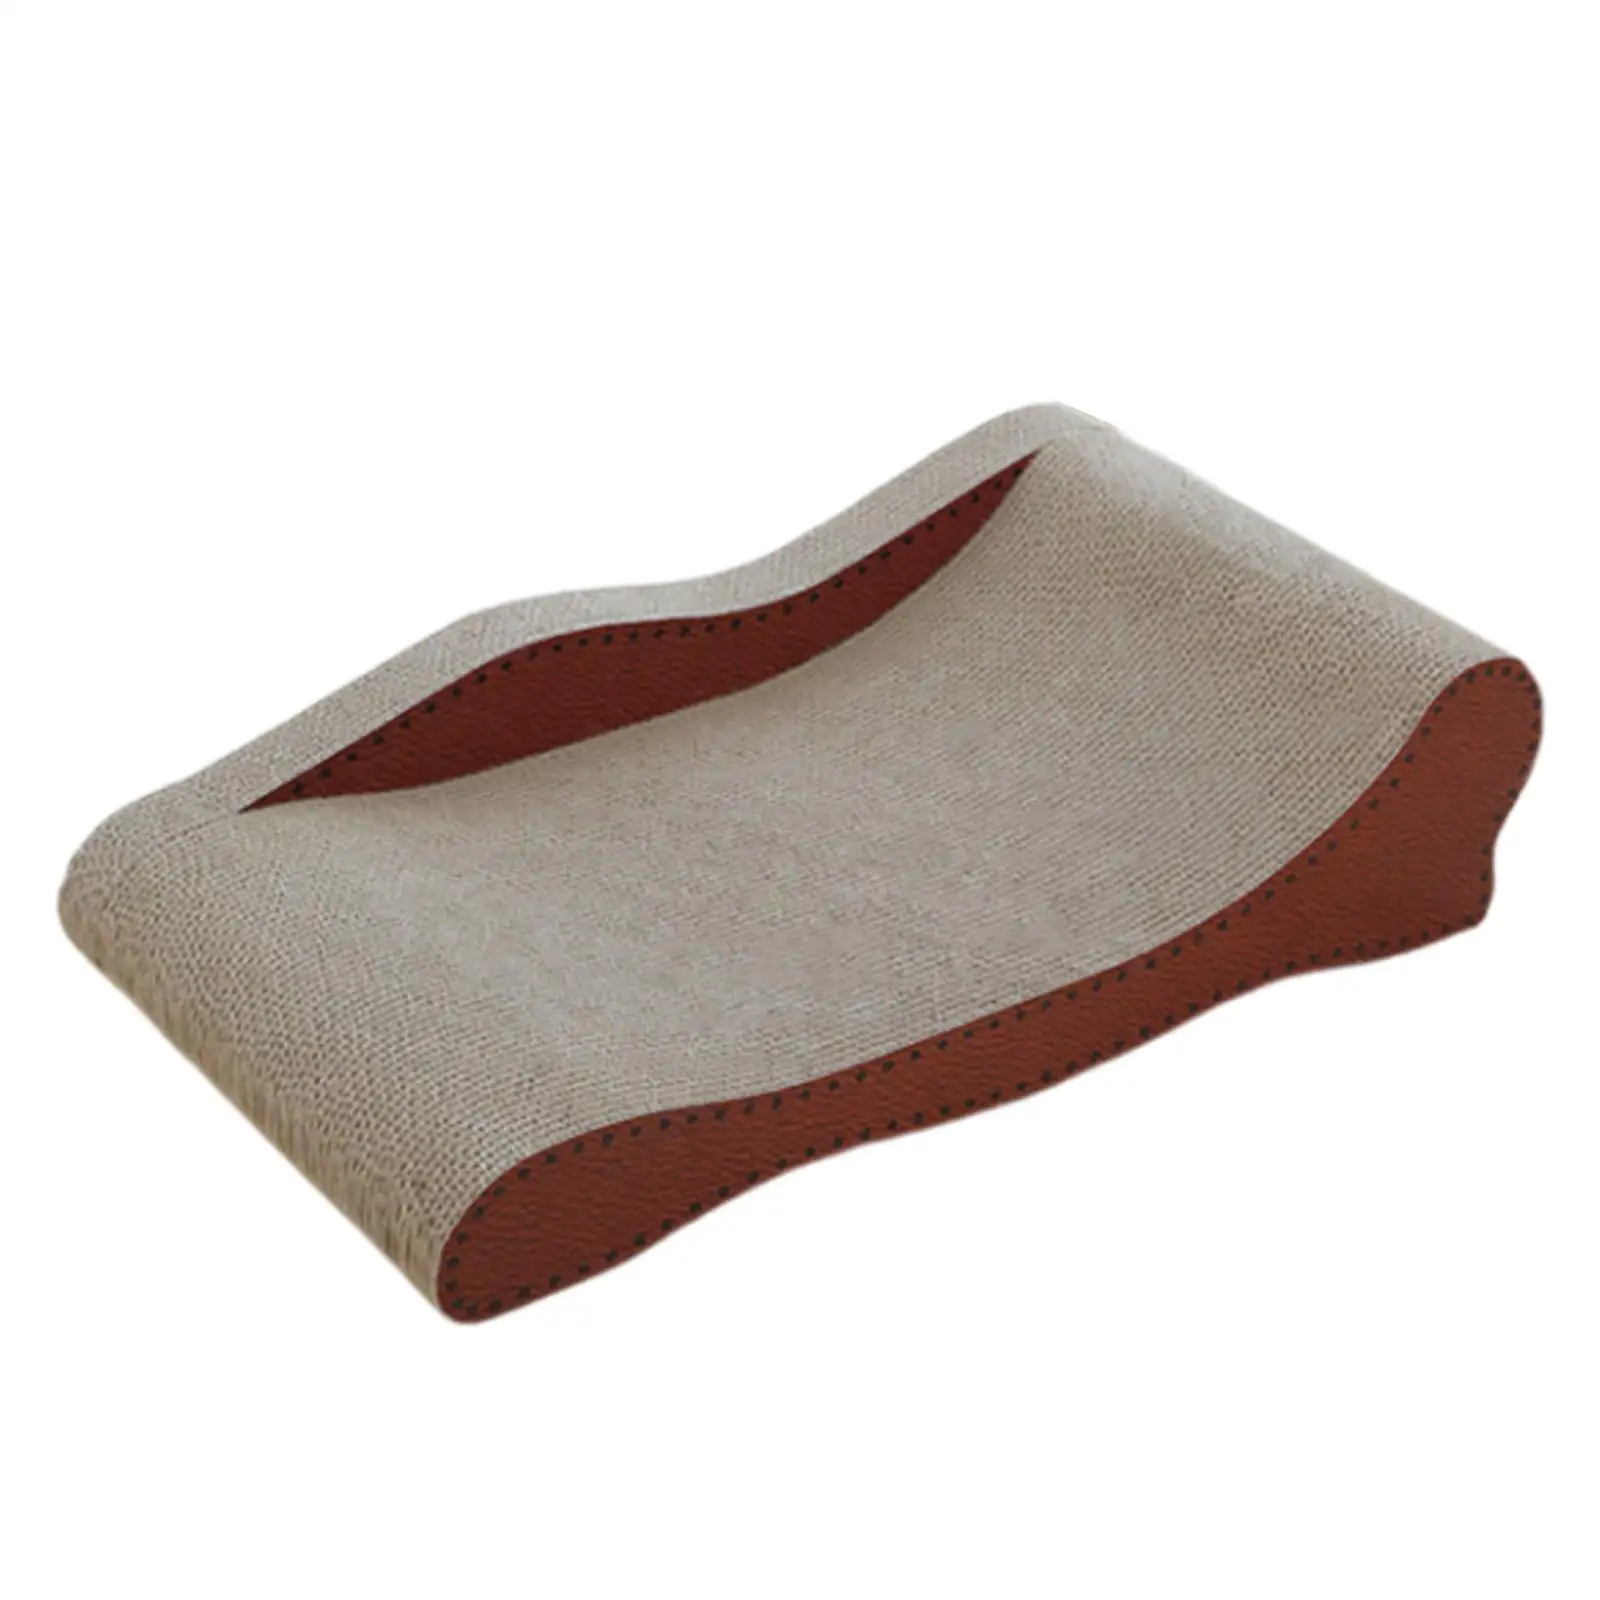 Cat Scratcher Large Durable Comfortable Cat Scratching Bed Cat Scratcher Lounge Scratcher Sofa Beds for Kitty Supplies Cats